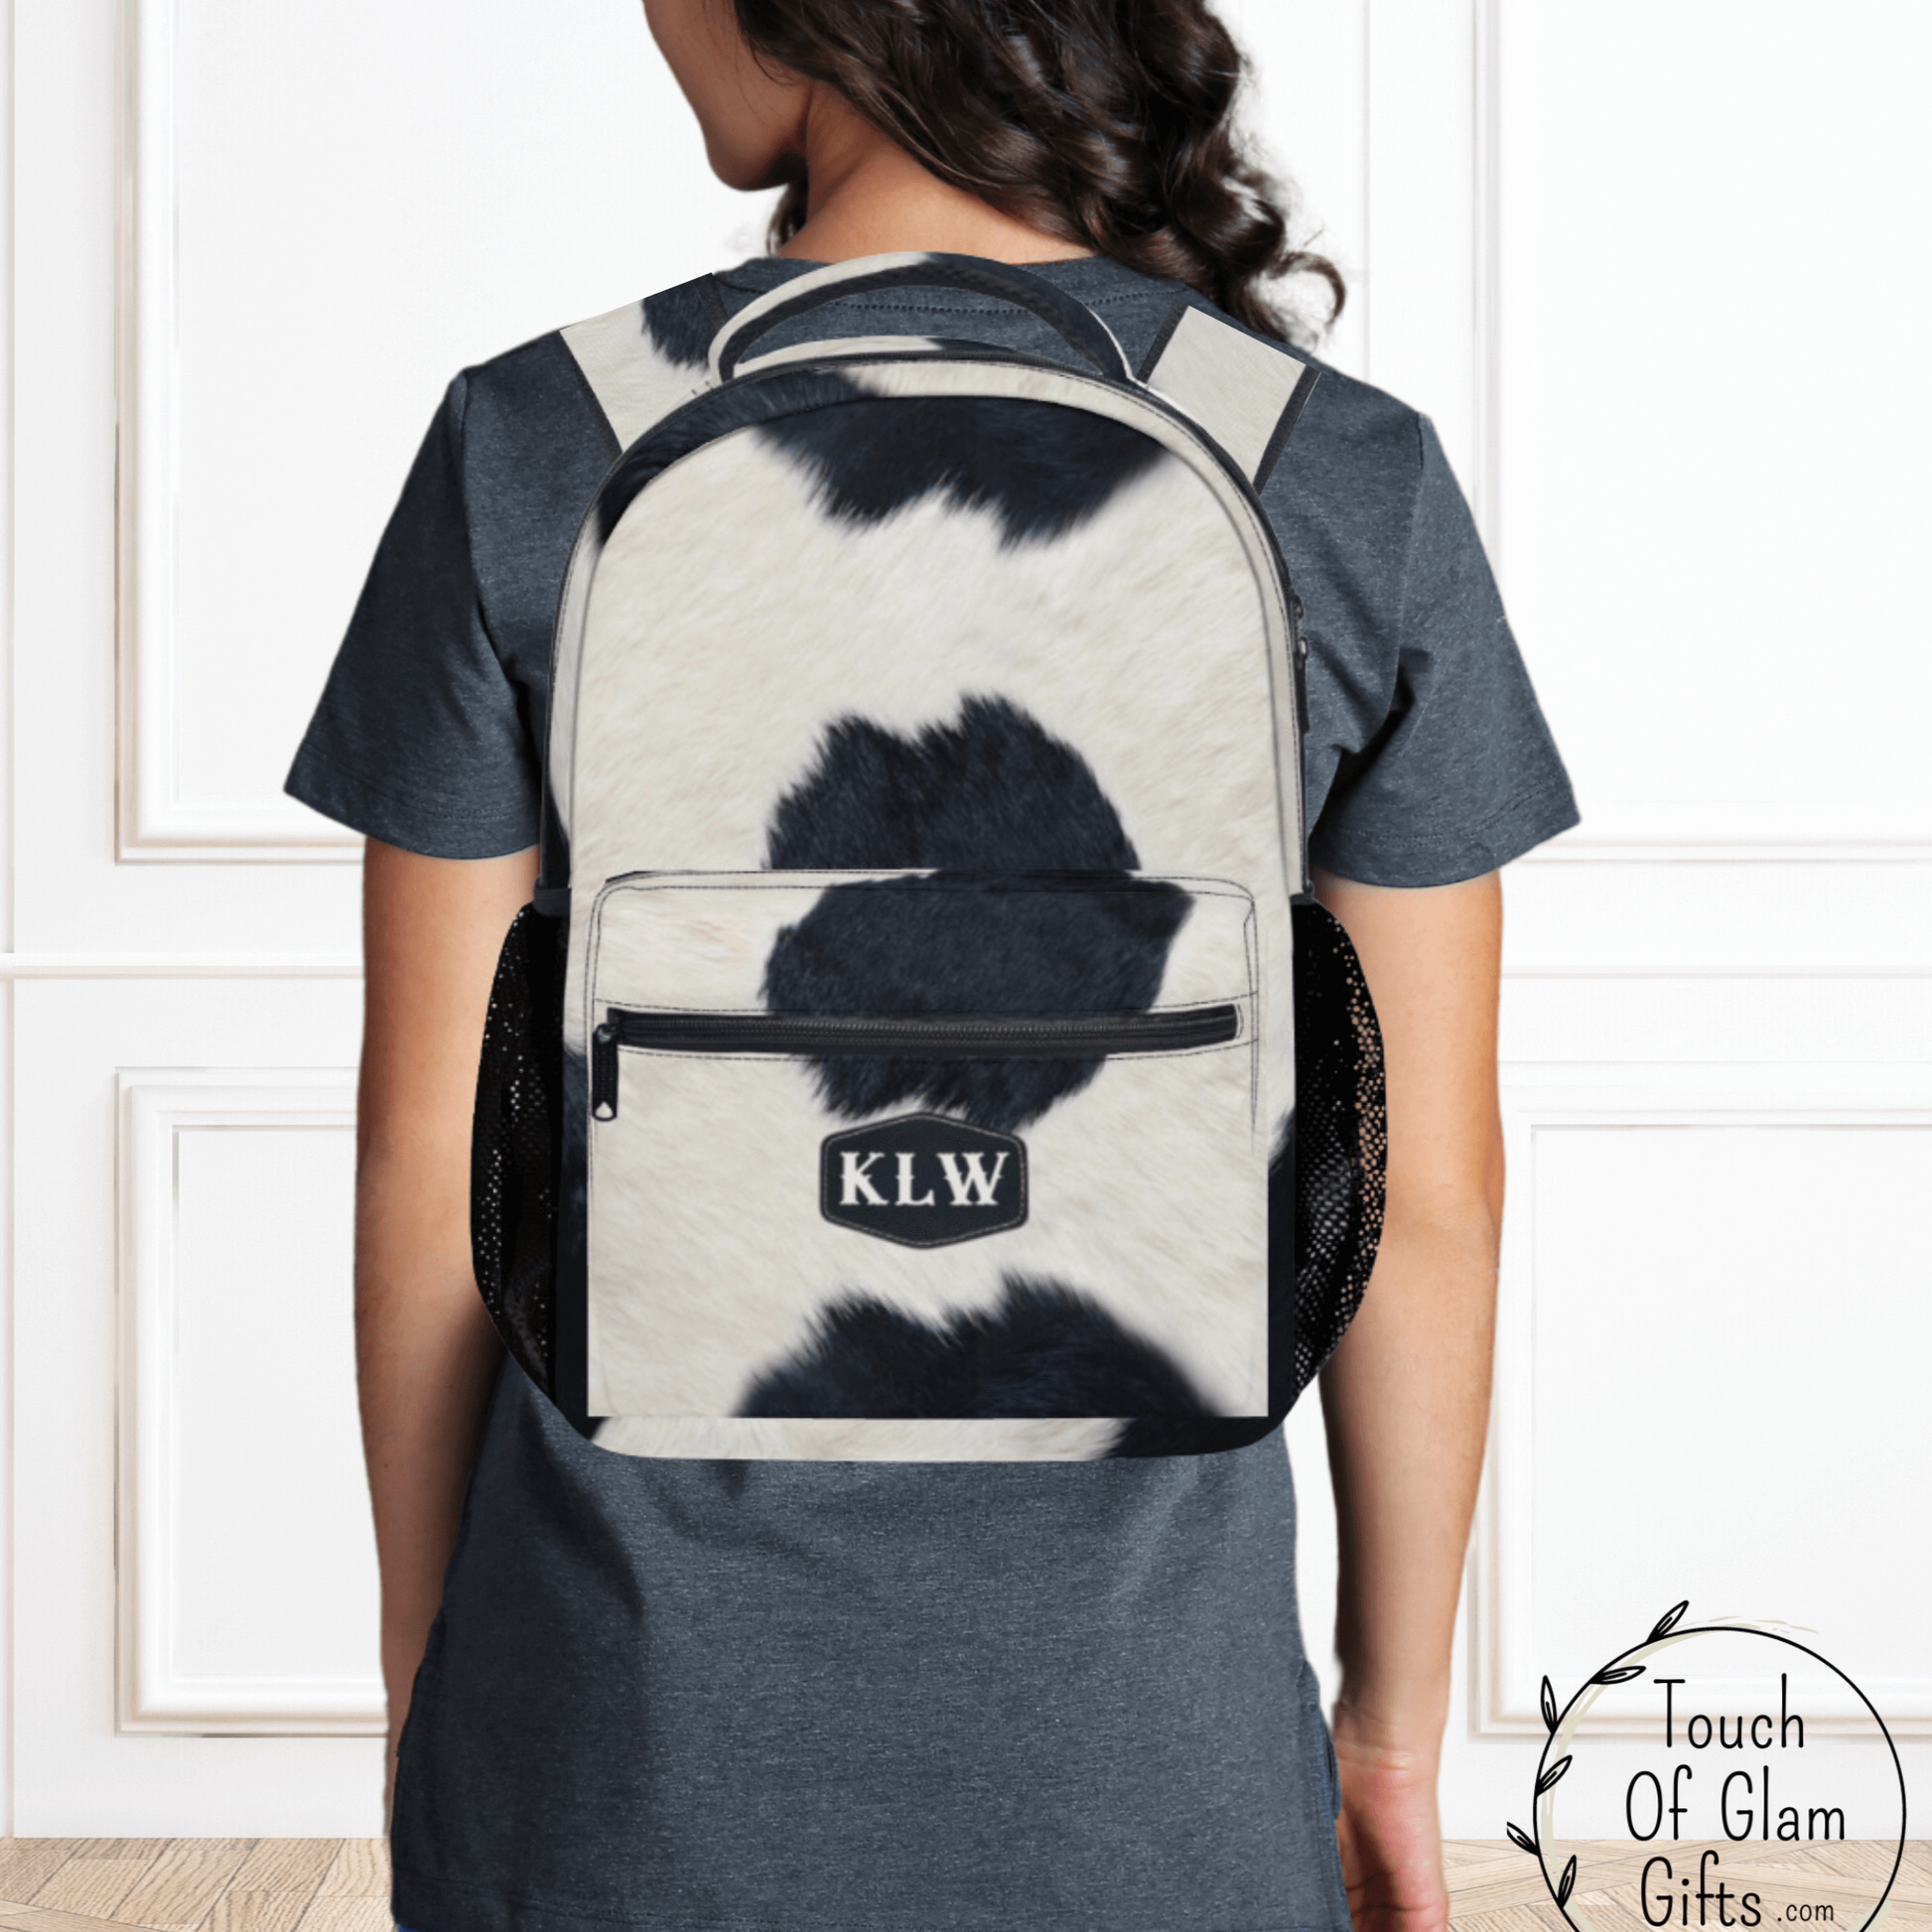 Our black cowhide backpack with monogrammed initials